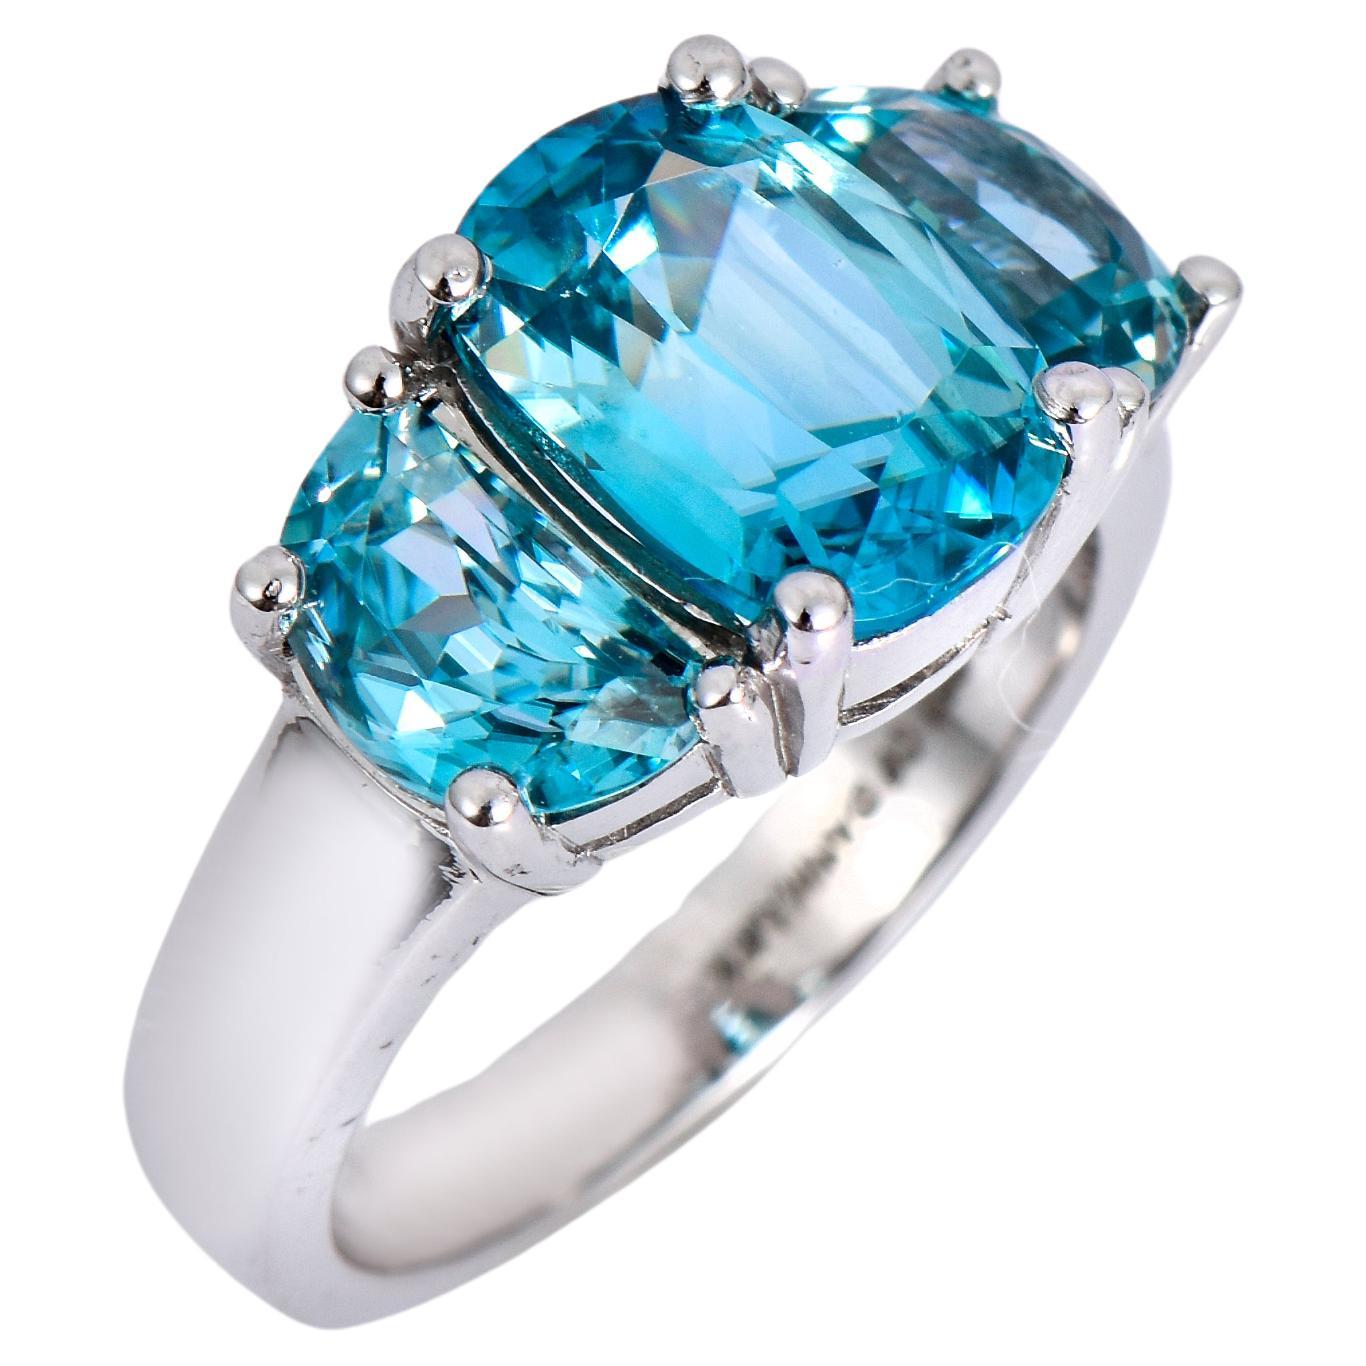 Orloff of Denmark, 8.06 ct Natural Blue Zircon Ring in 925 Sterling Silver